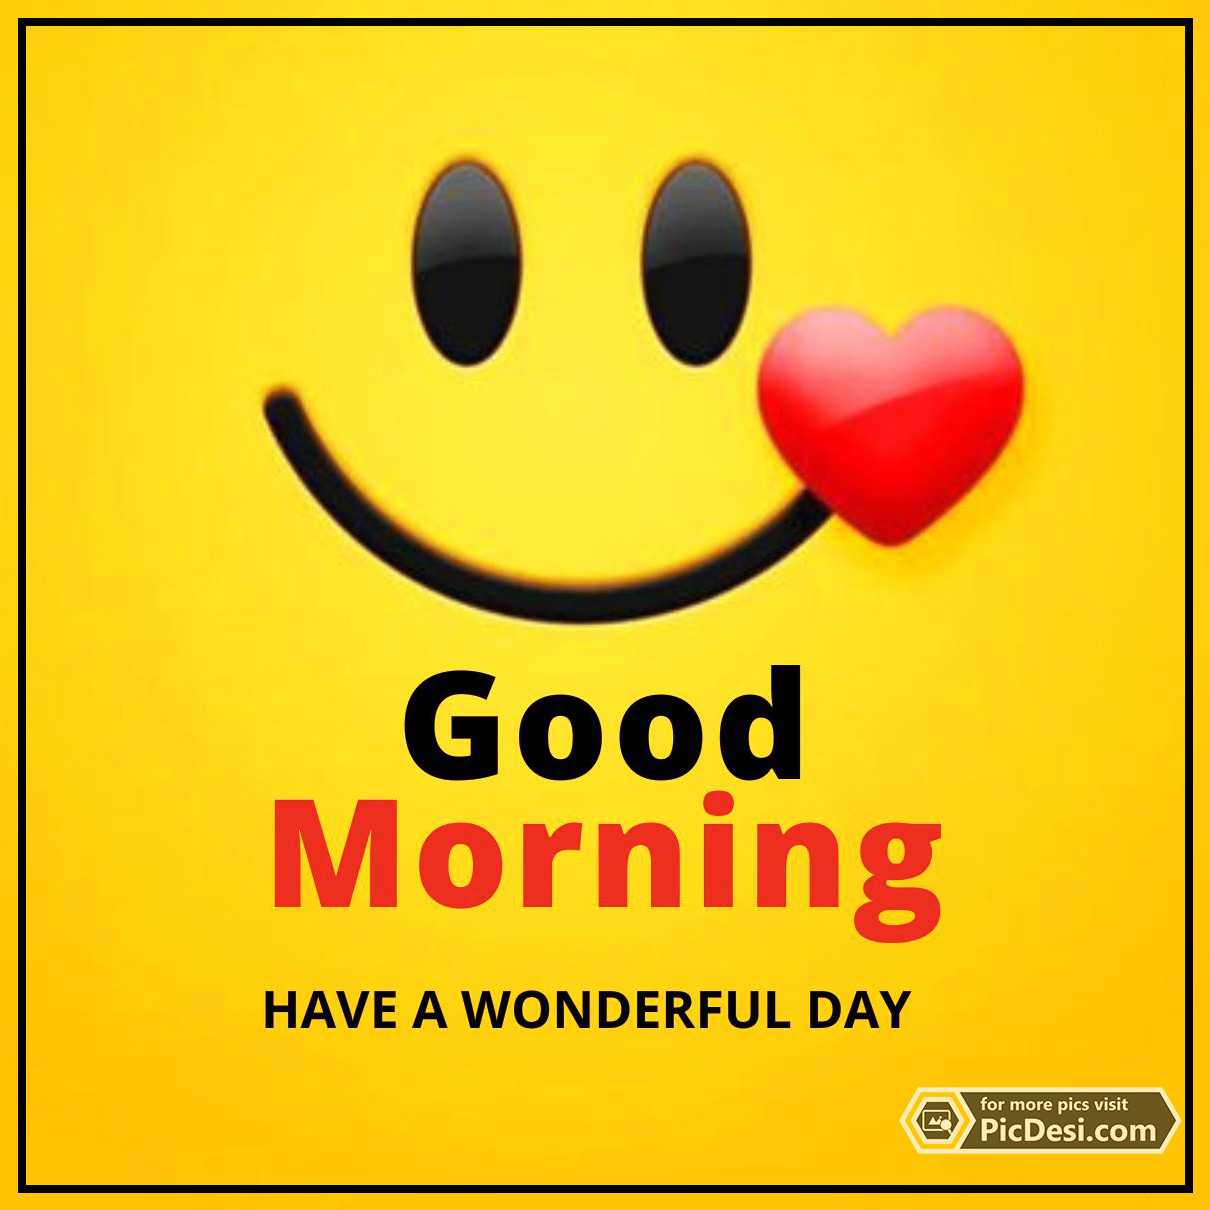 Have Wonderful Day Smiley Image Good Morning Picture